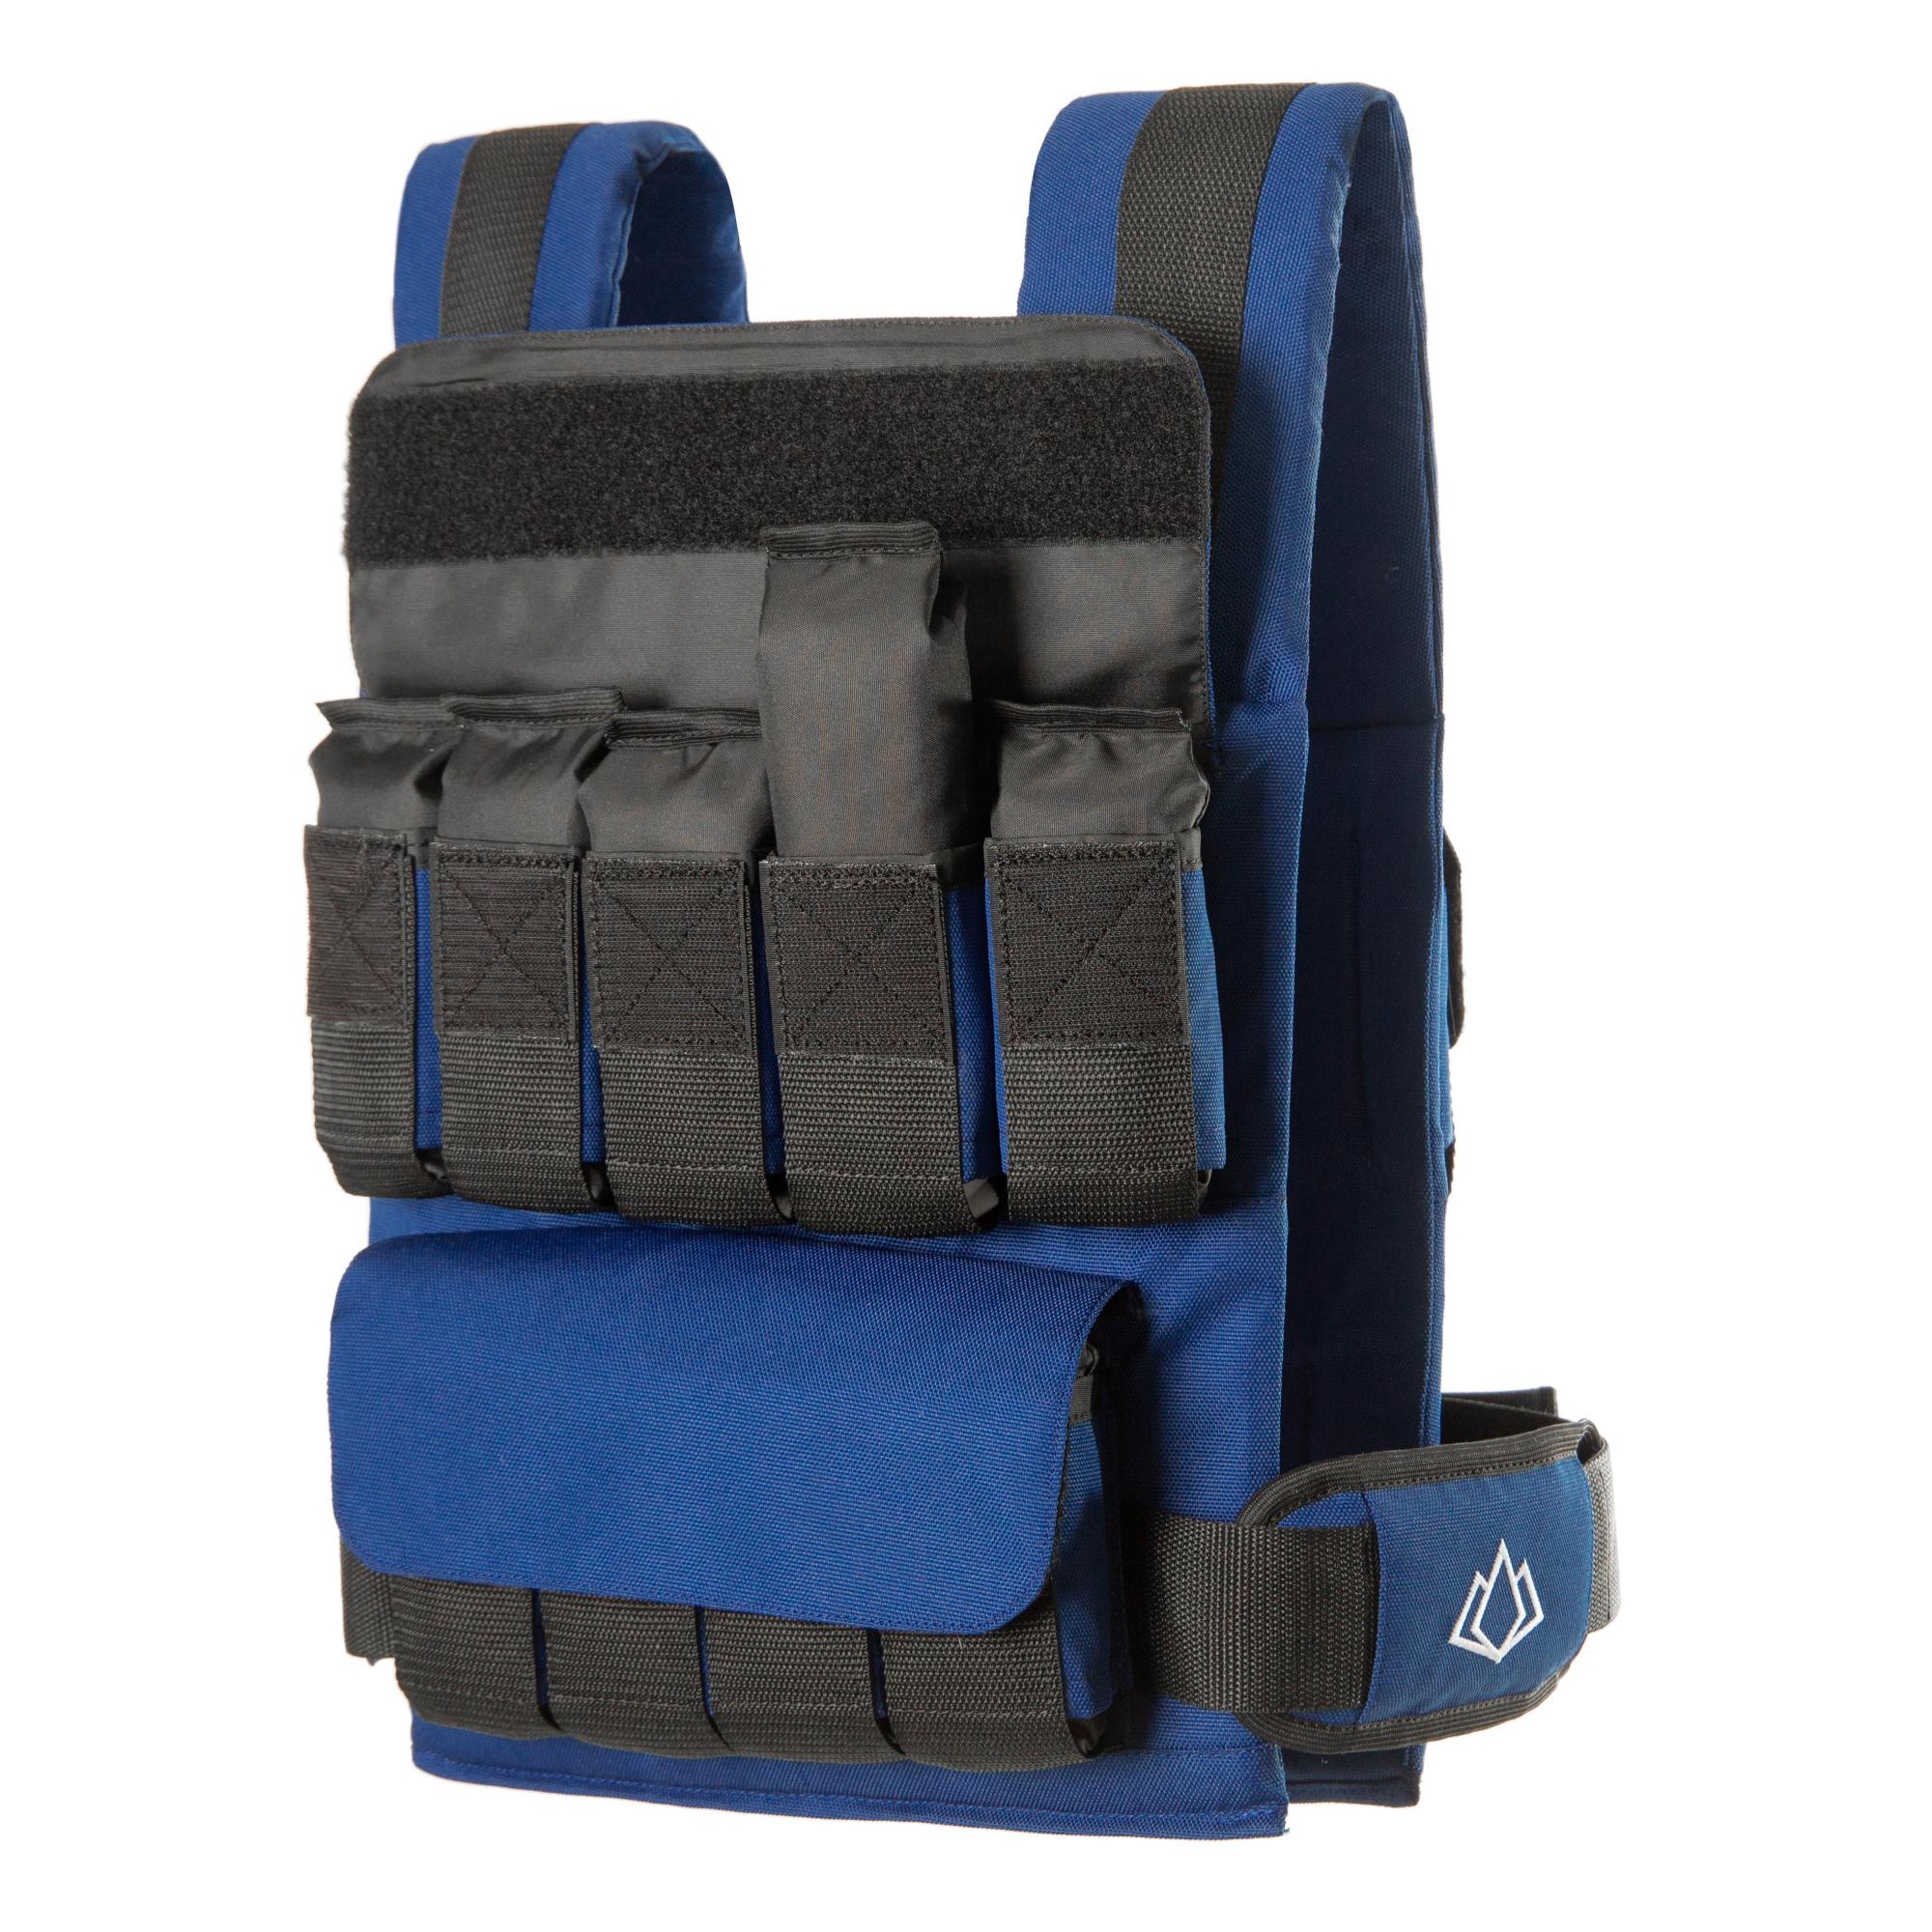 weighted vest in stores